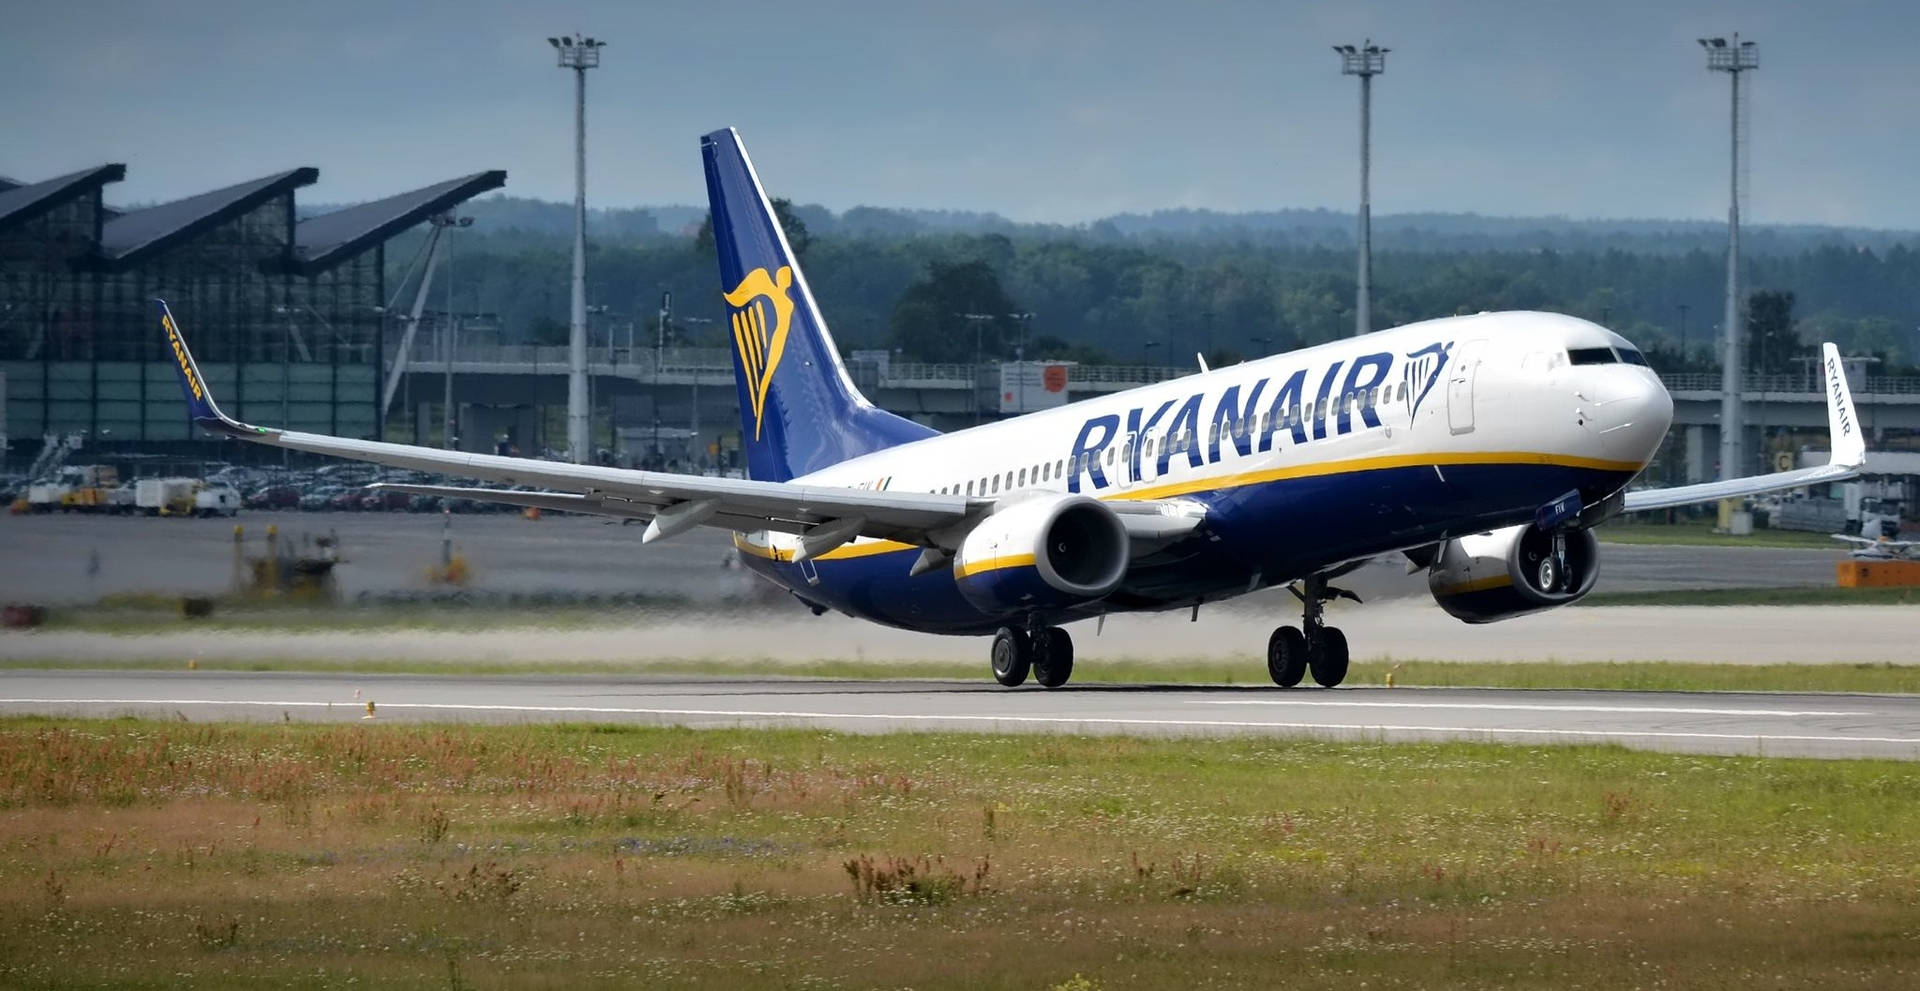 Ryanair Airplane On Runway With Grass Wallpaper